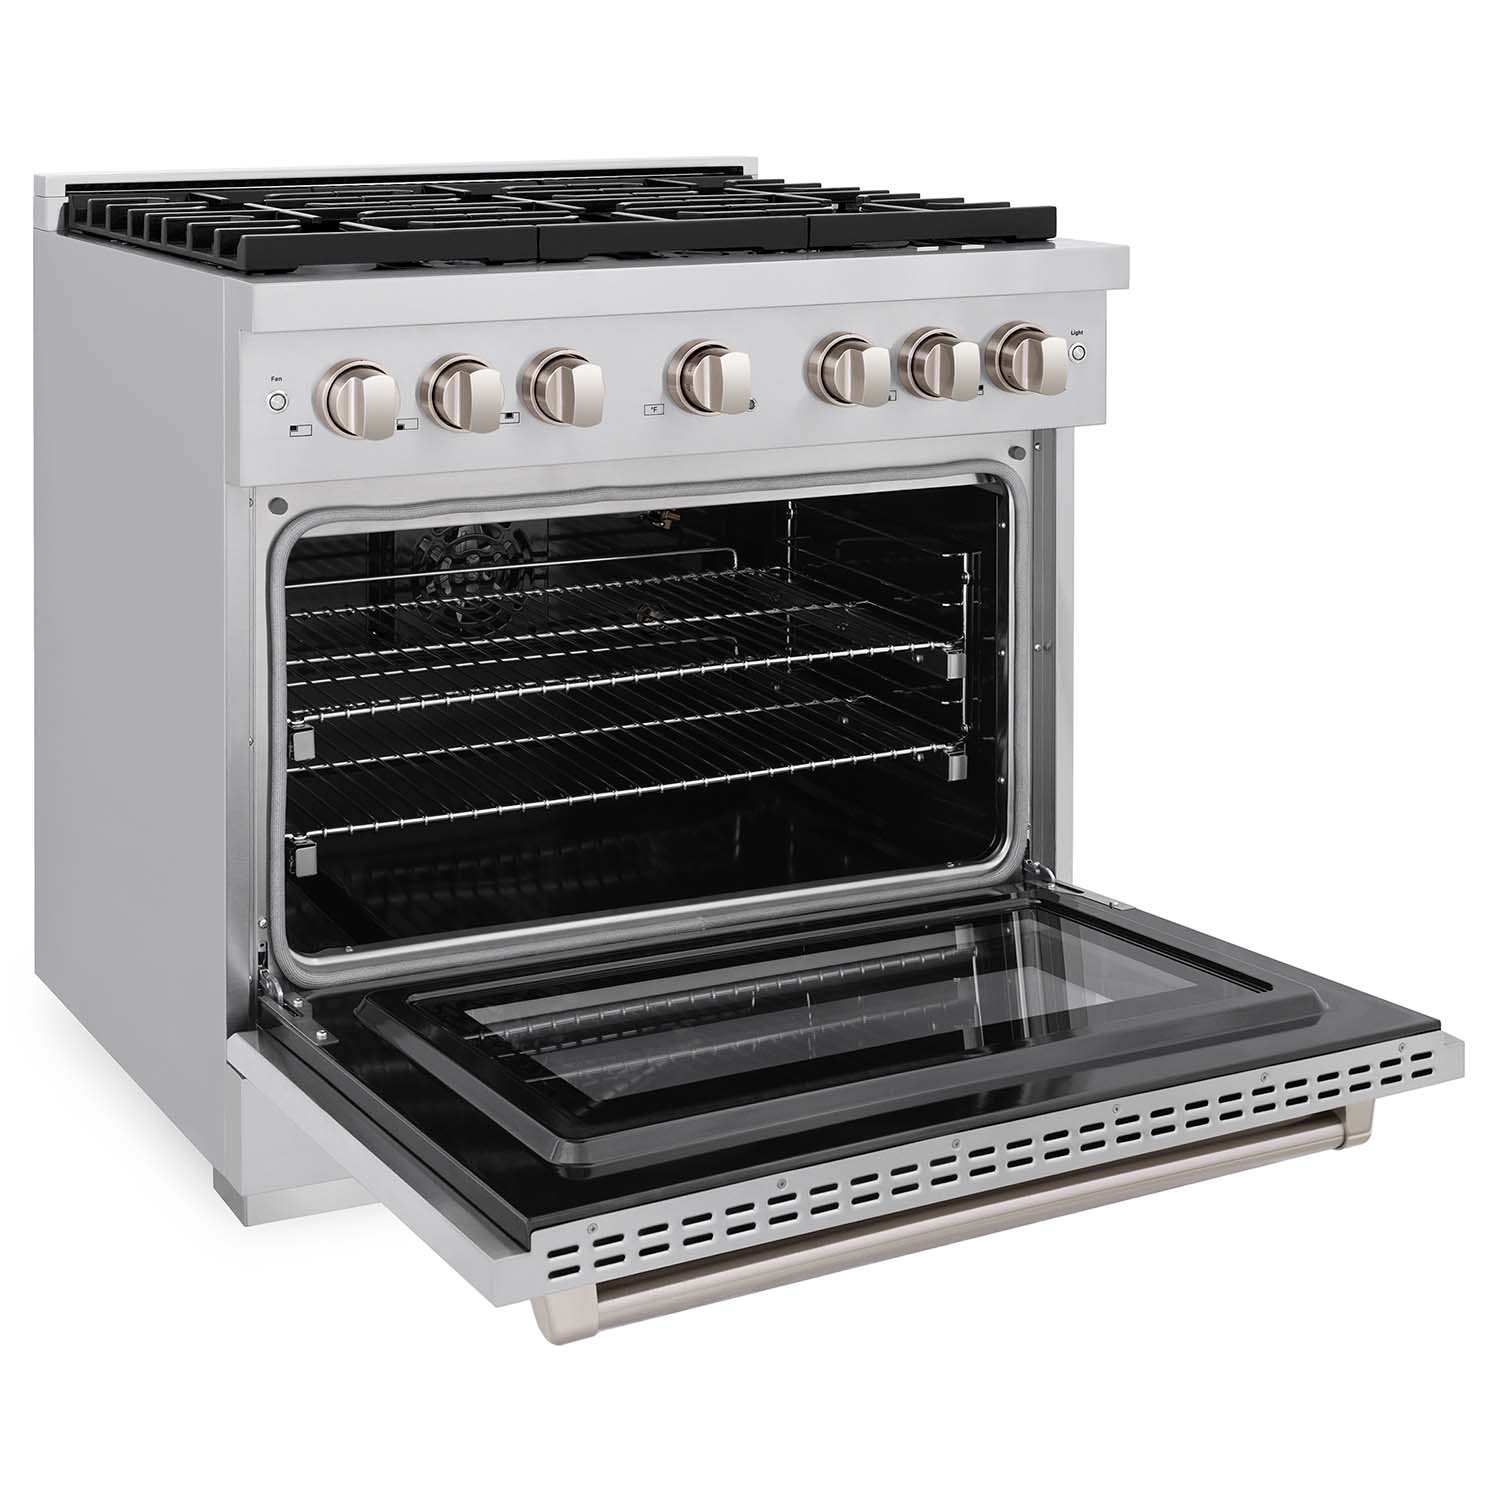 ZLINE 36 in. 5.2 cu. ft. 6 Burner Gas Range with Convection Gas Oven in Stainless Steel (SGR36) side, oven open.